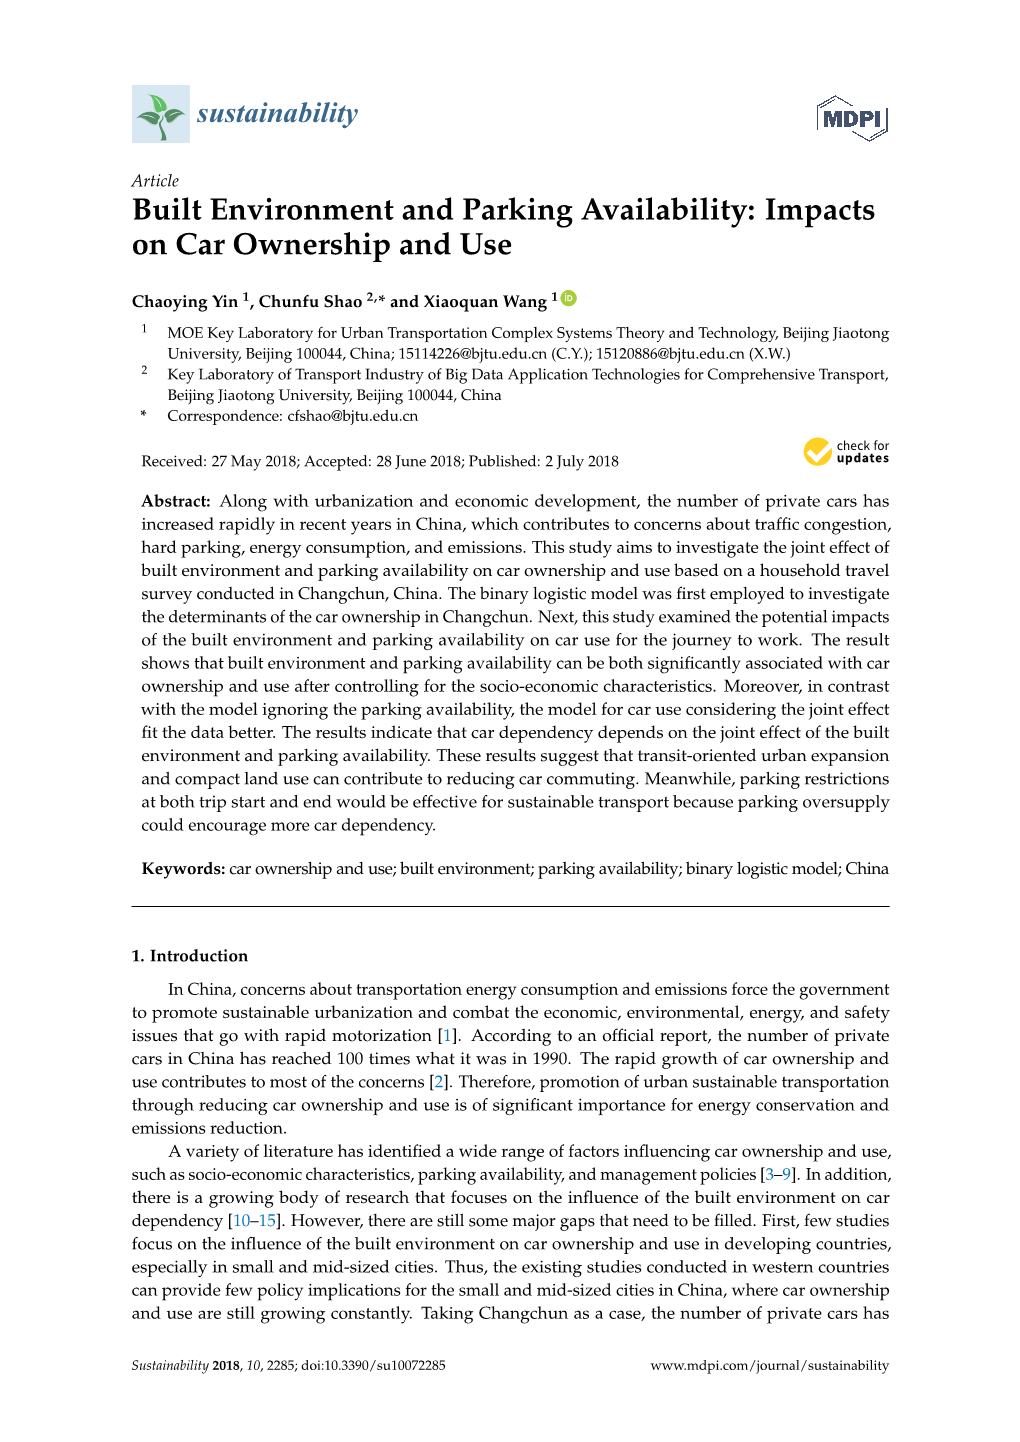 Built Environment and Parking Availability: Impacts on Car Ownership and Use